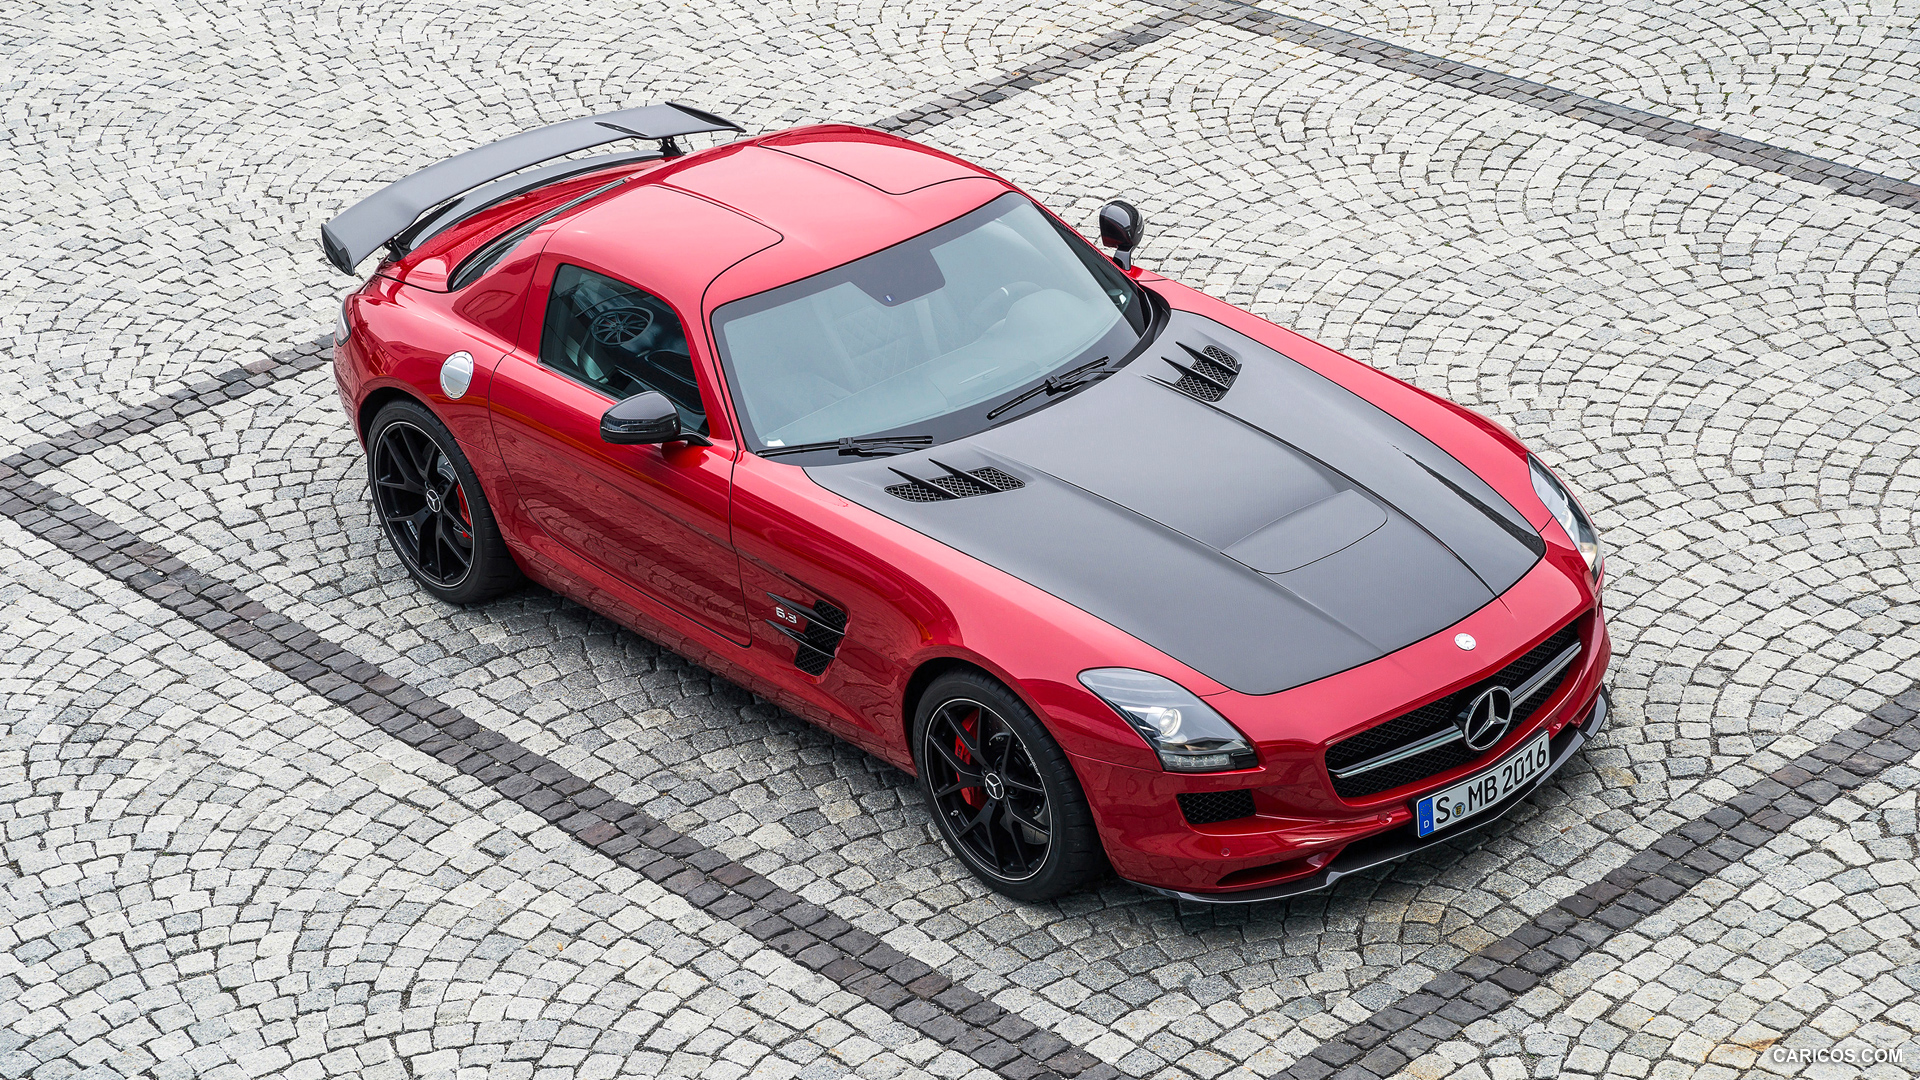  2015 Mercedes-Benz SLS AMG GT Coupe Final Edition - Top, #25 of 41